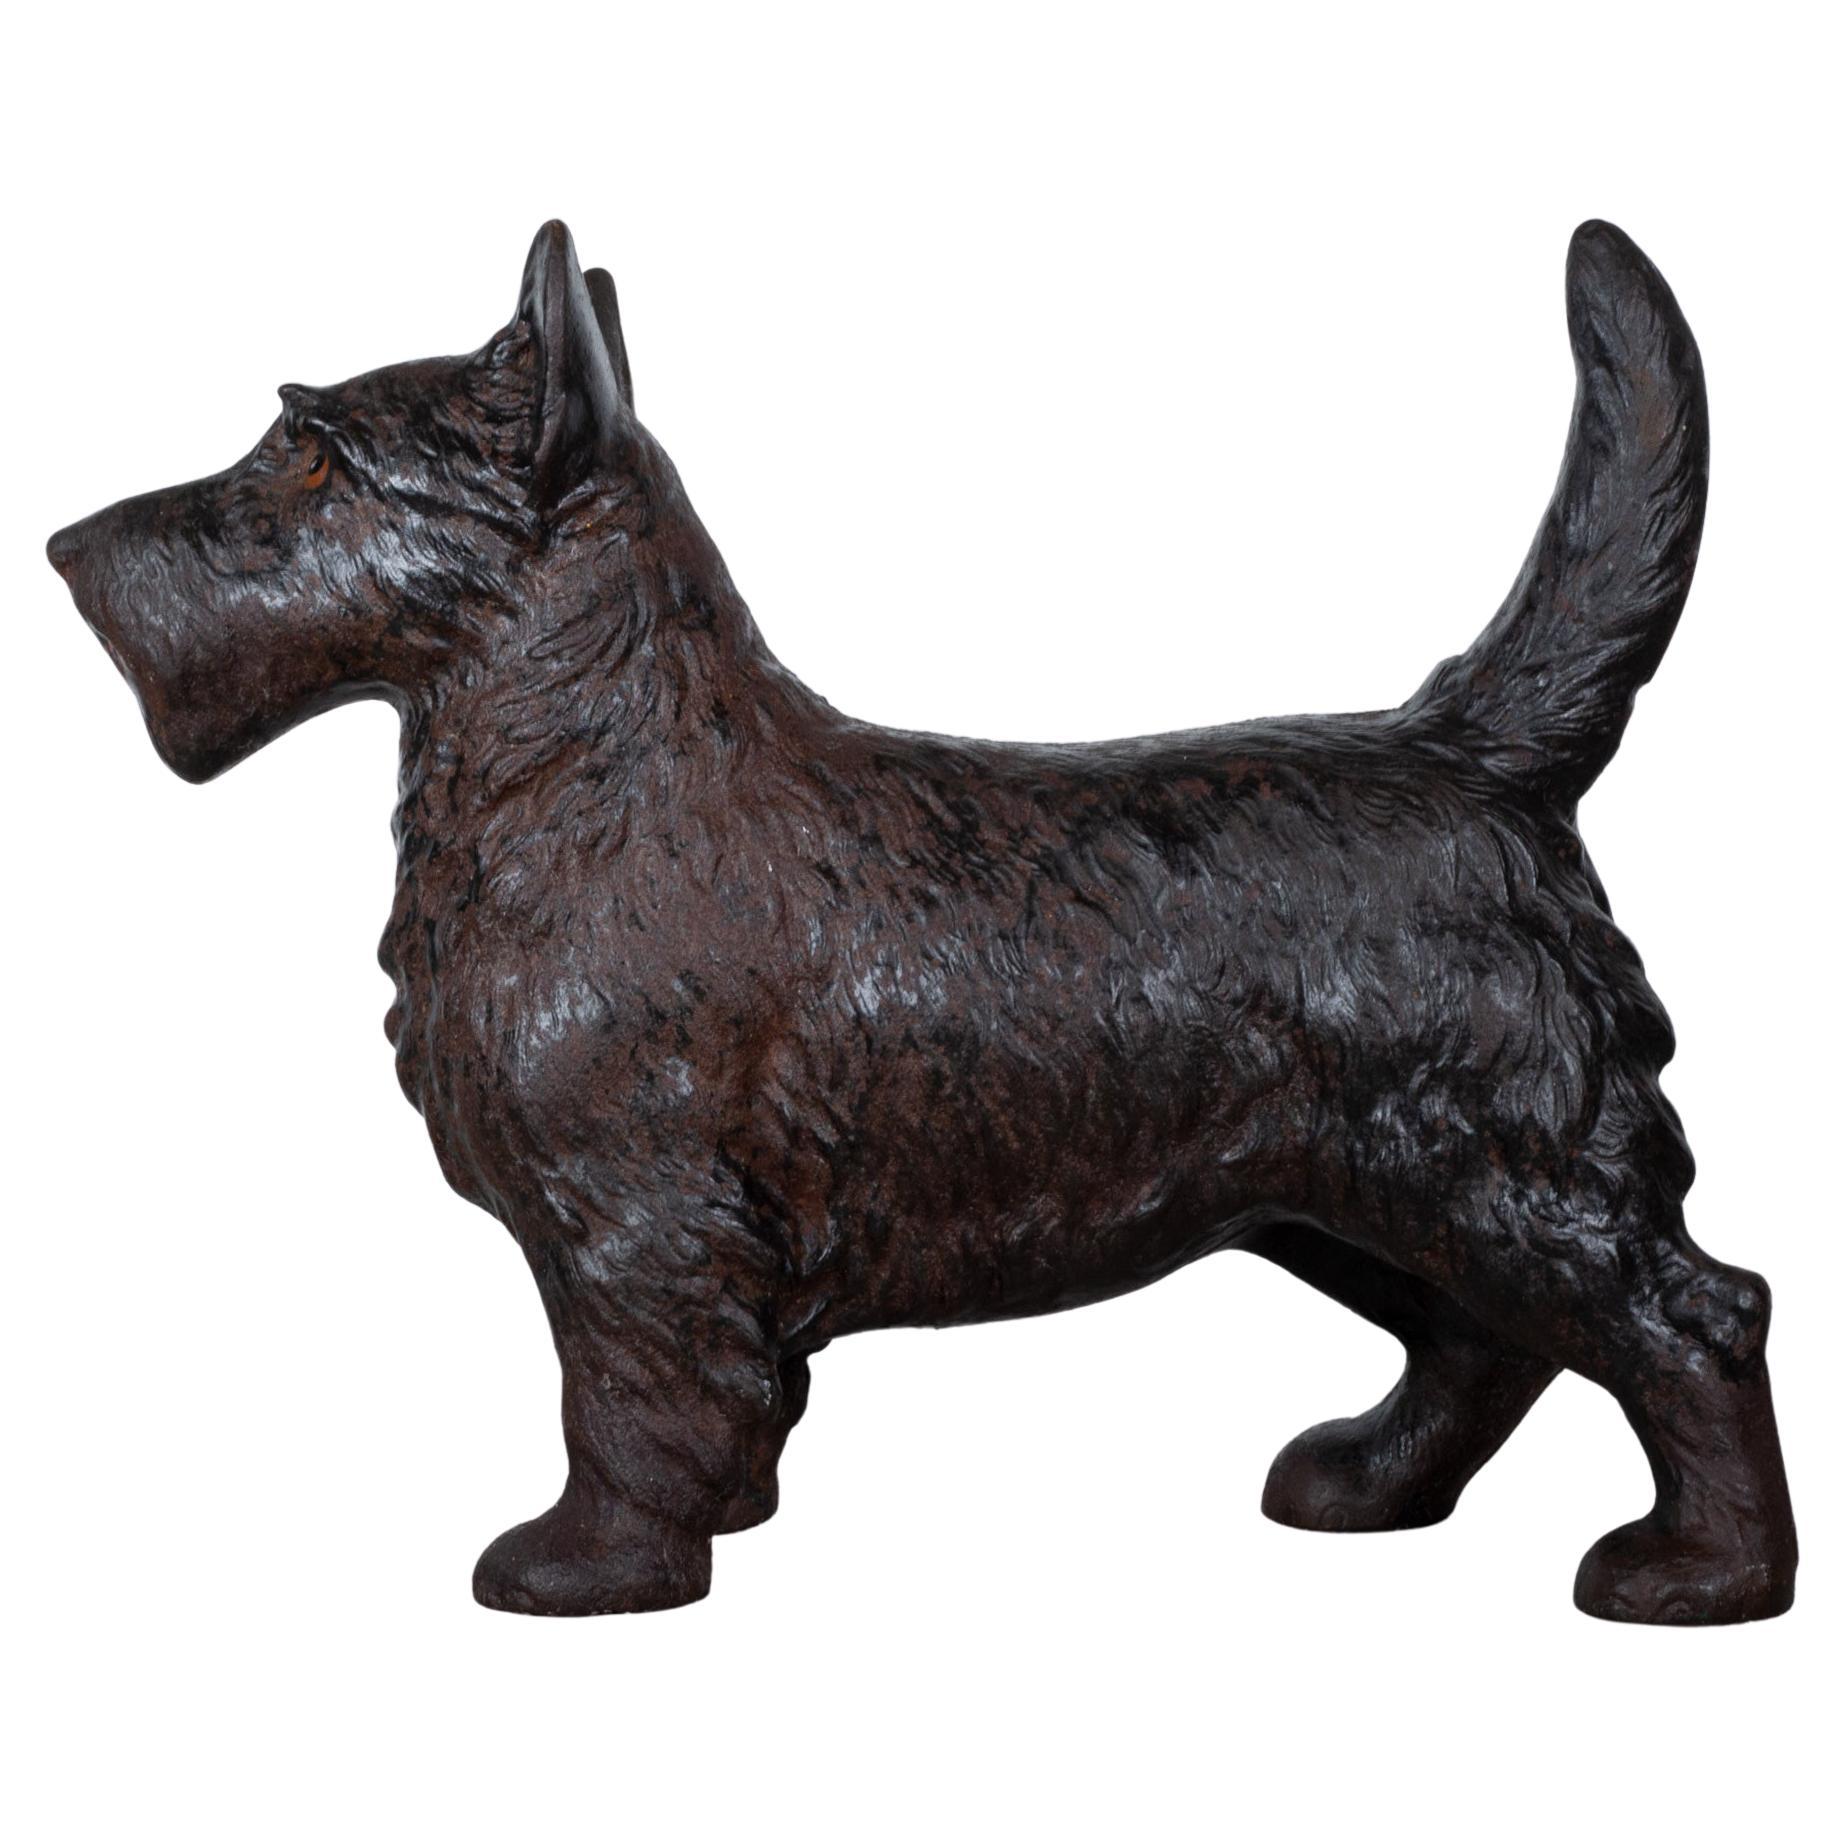 ABOUT

This is an original hand painted cast iron Scottish Terrier doorstop manufactured by the Hubley Manufacturing Company in Lancaster Pennsylvania USA. The piece has retained its original hand painted finish and is in good condition with the